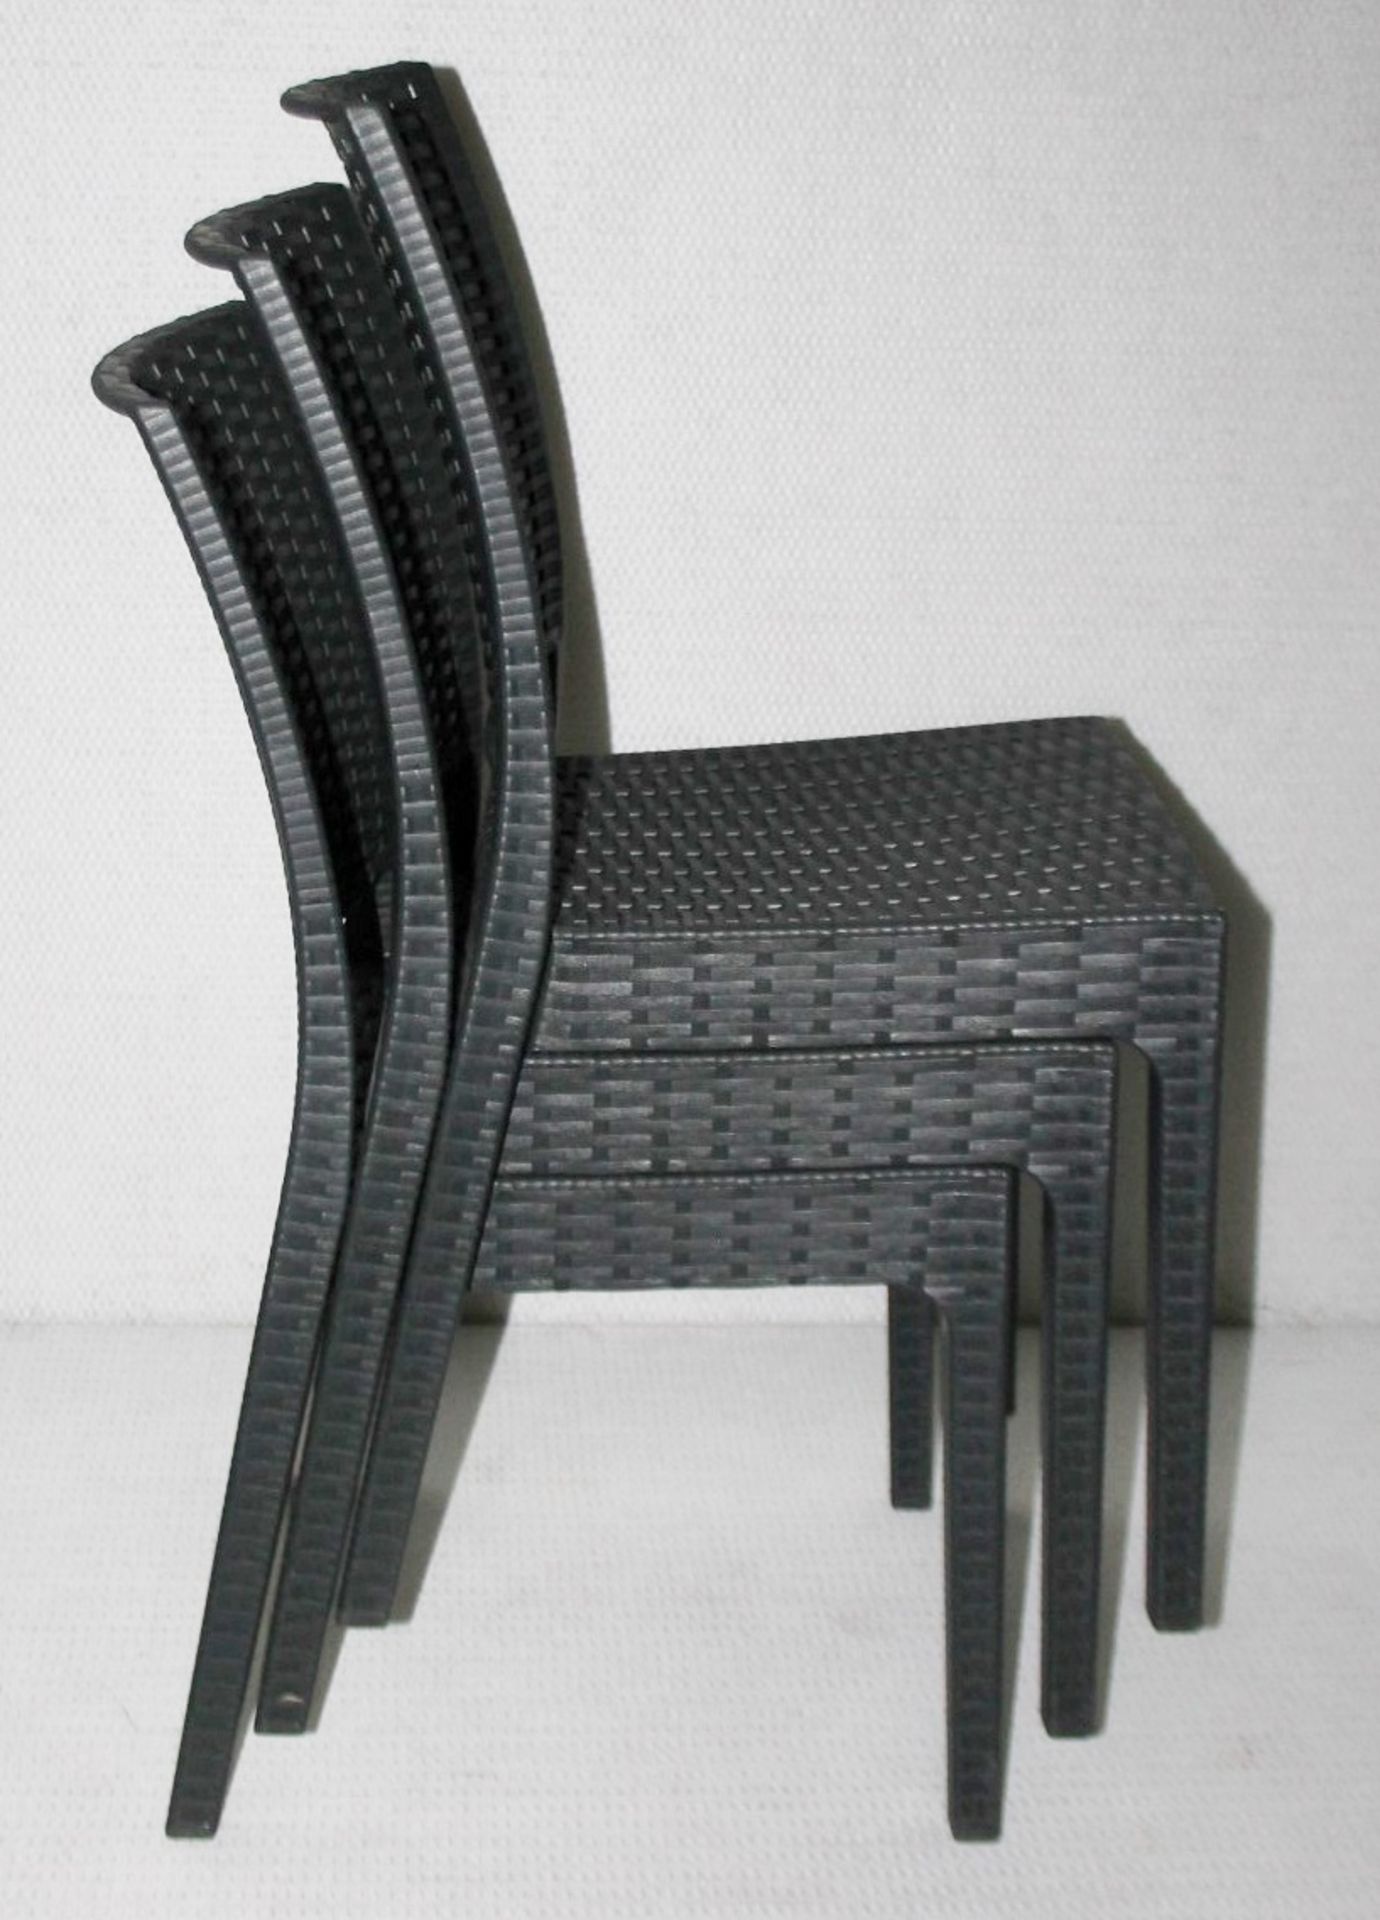 4 x Siesta 'Florida' Rattan Style Garden Chairs In Dark Grey - Suitable For Commercial or Home Use - - Image 5 of 14